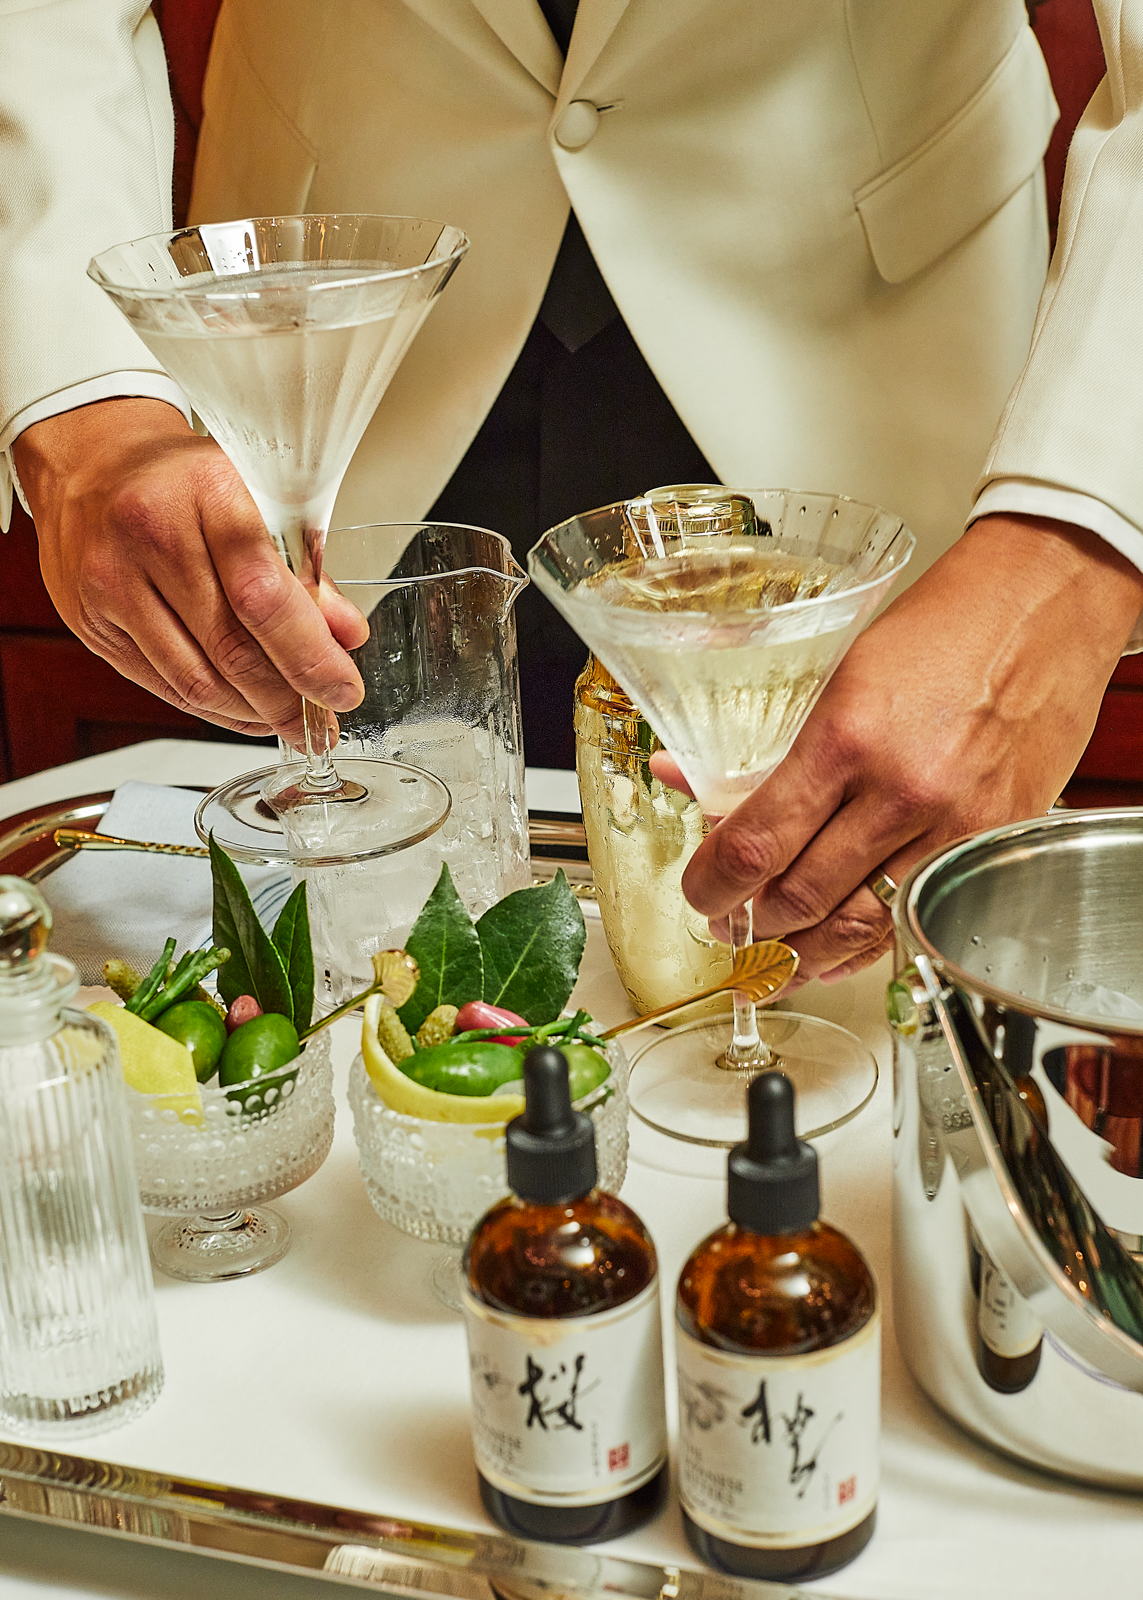 A waiter sets the table with cocktail glasses and welcome dishes for the guests.